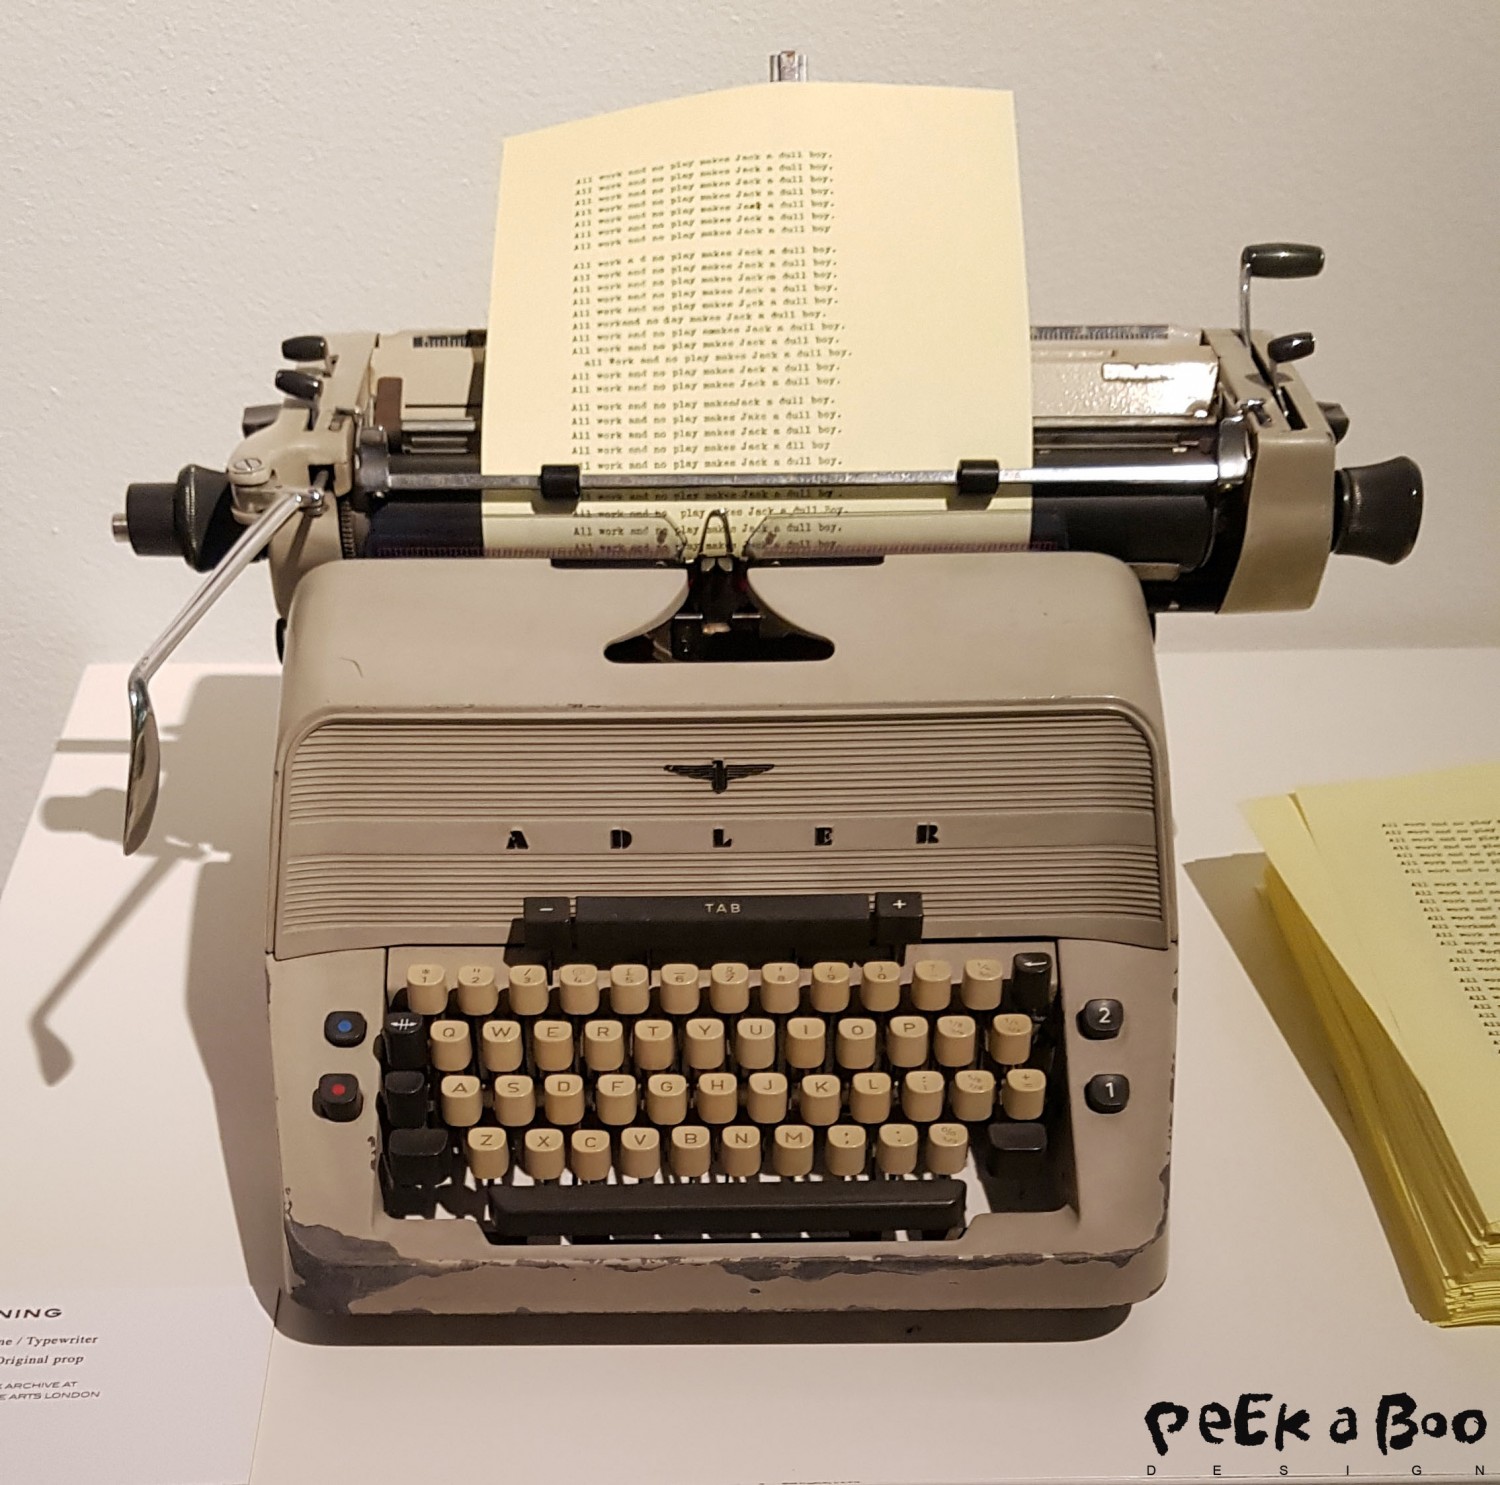 "All work and no play makes Jack a dull boy" this typewriter is also from the Shining.